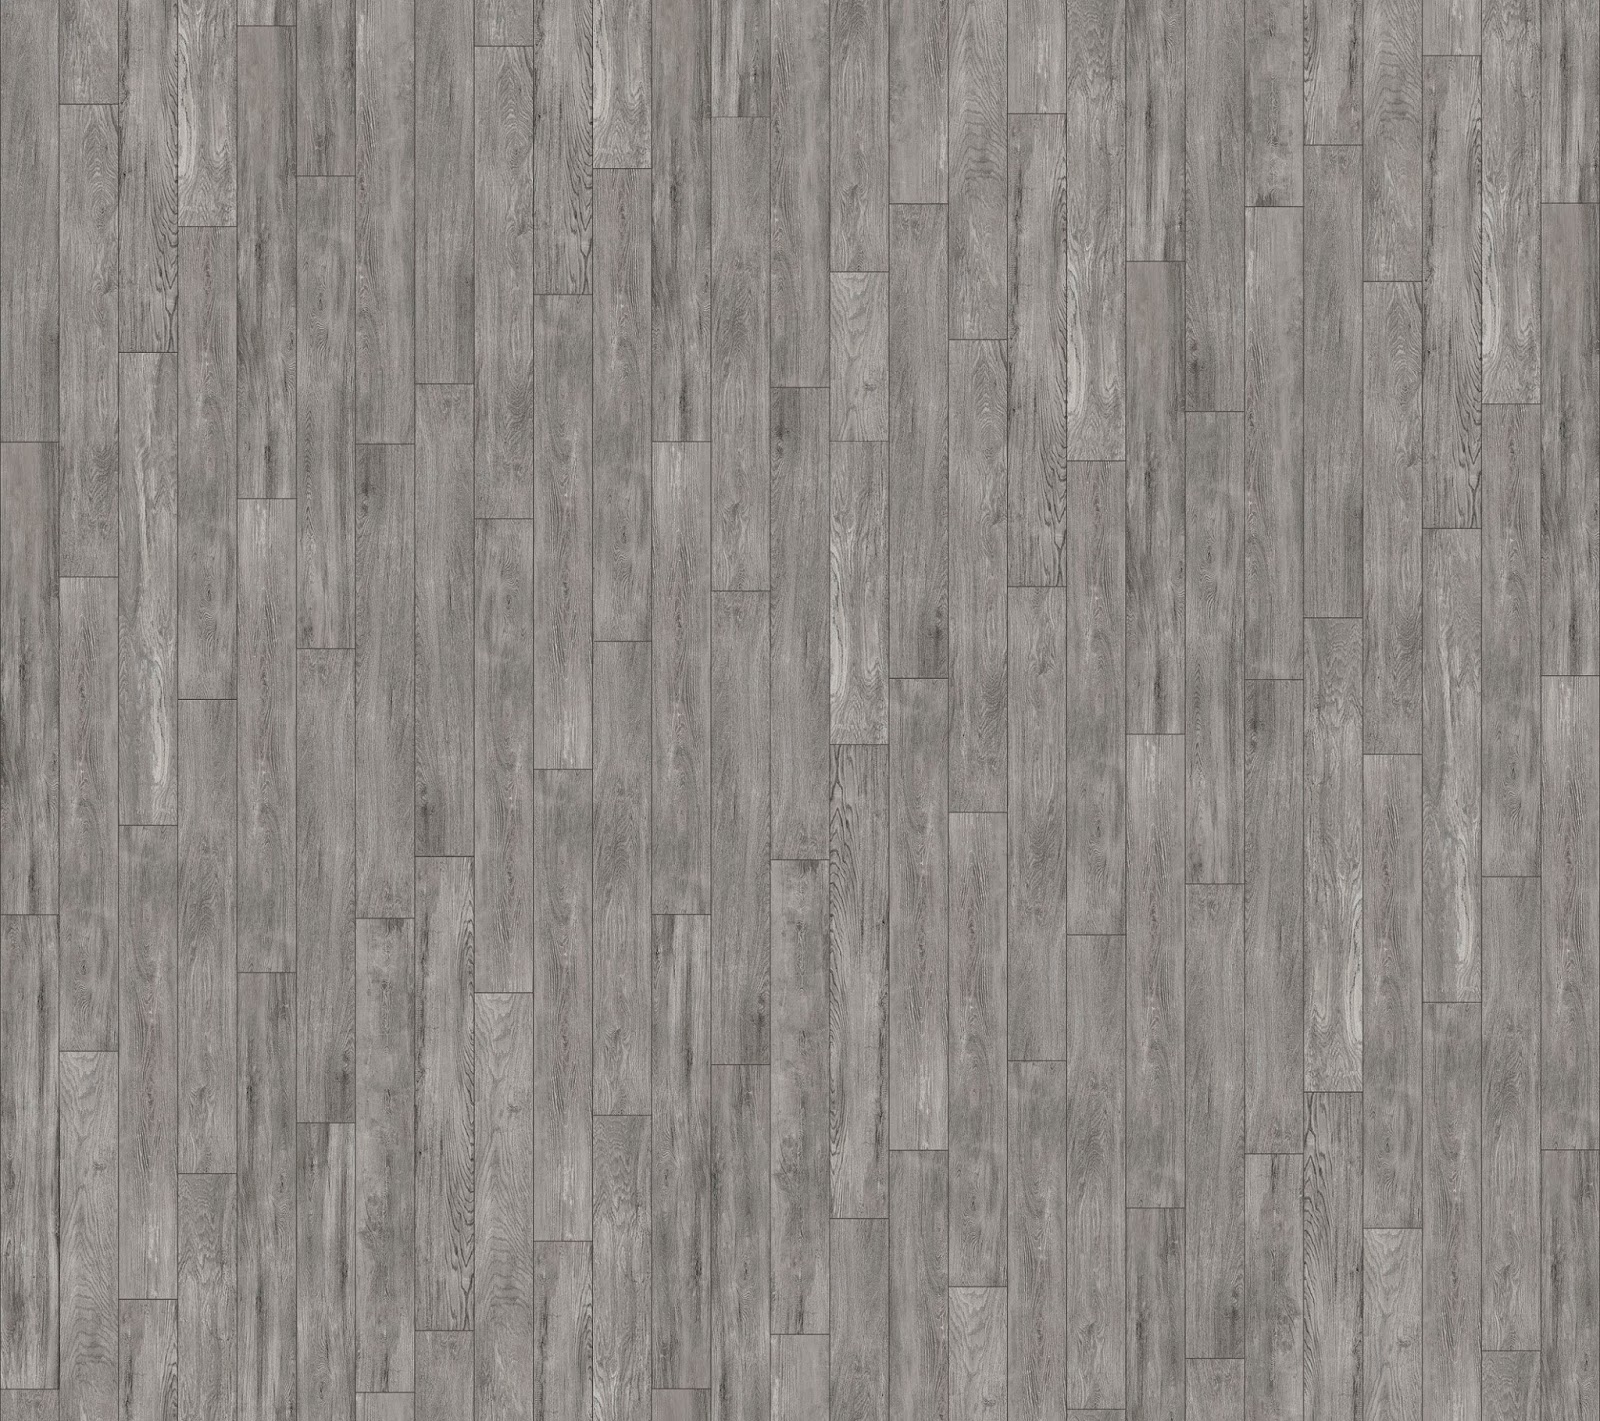 TEXTURE SEAMLESS PARQUET Vray Sketchup TUT